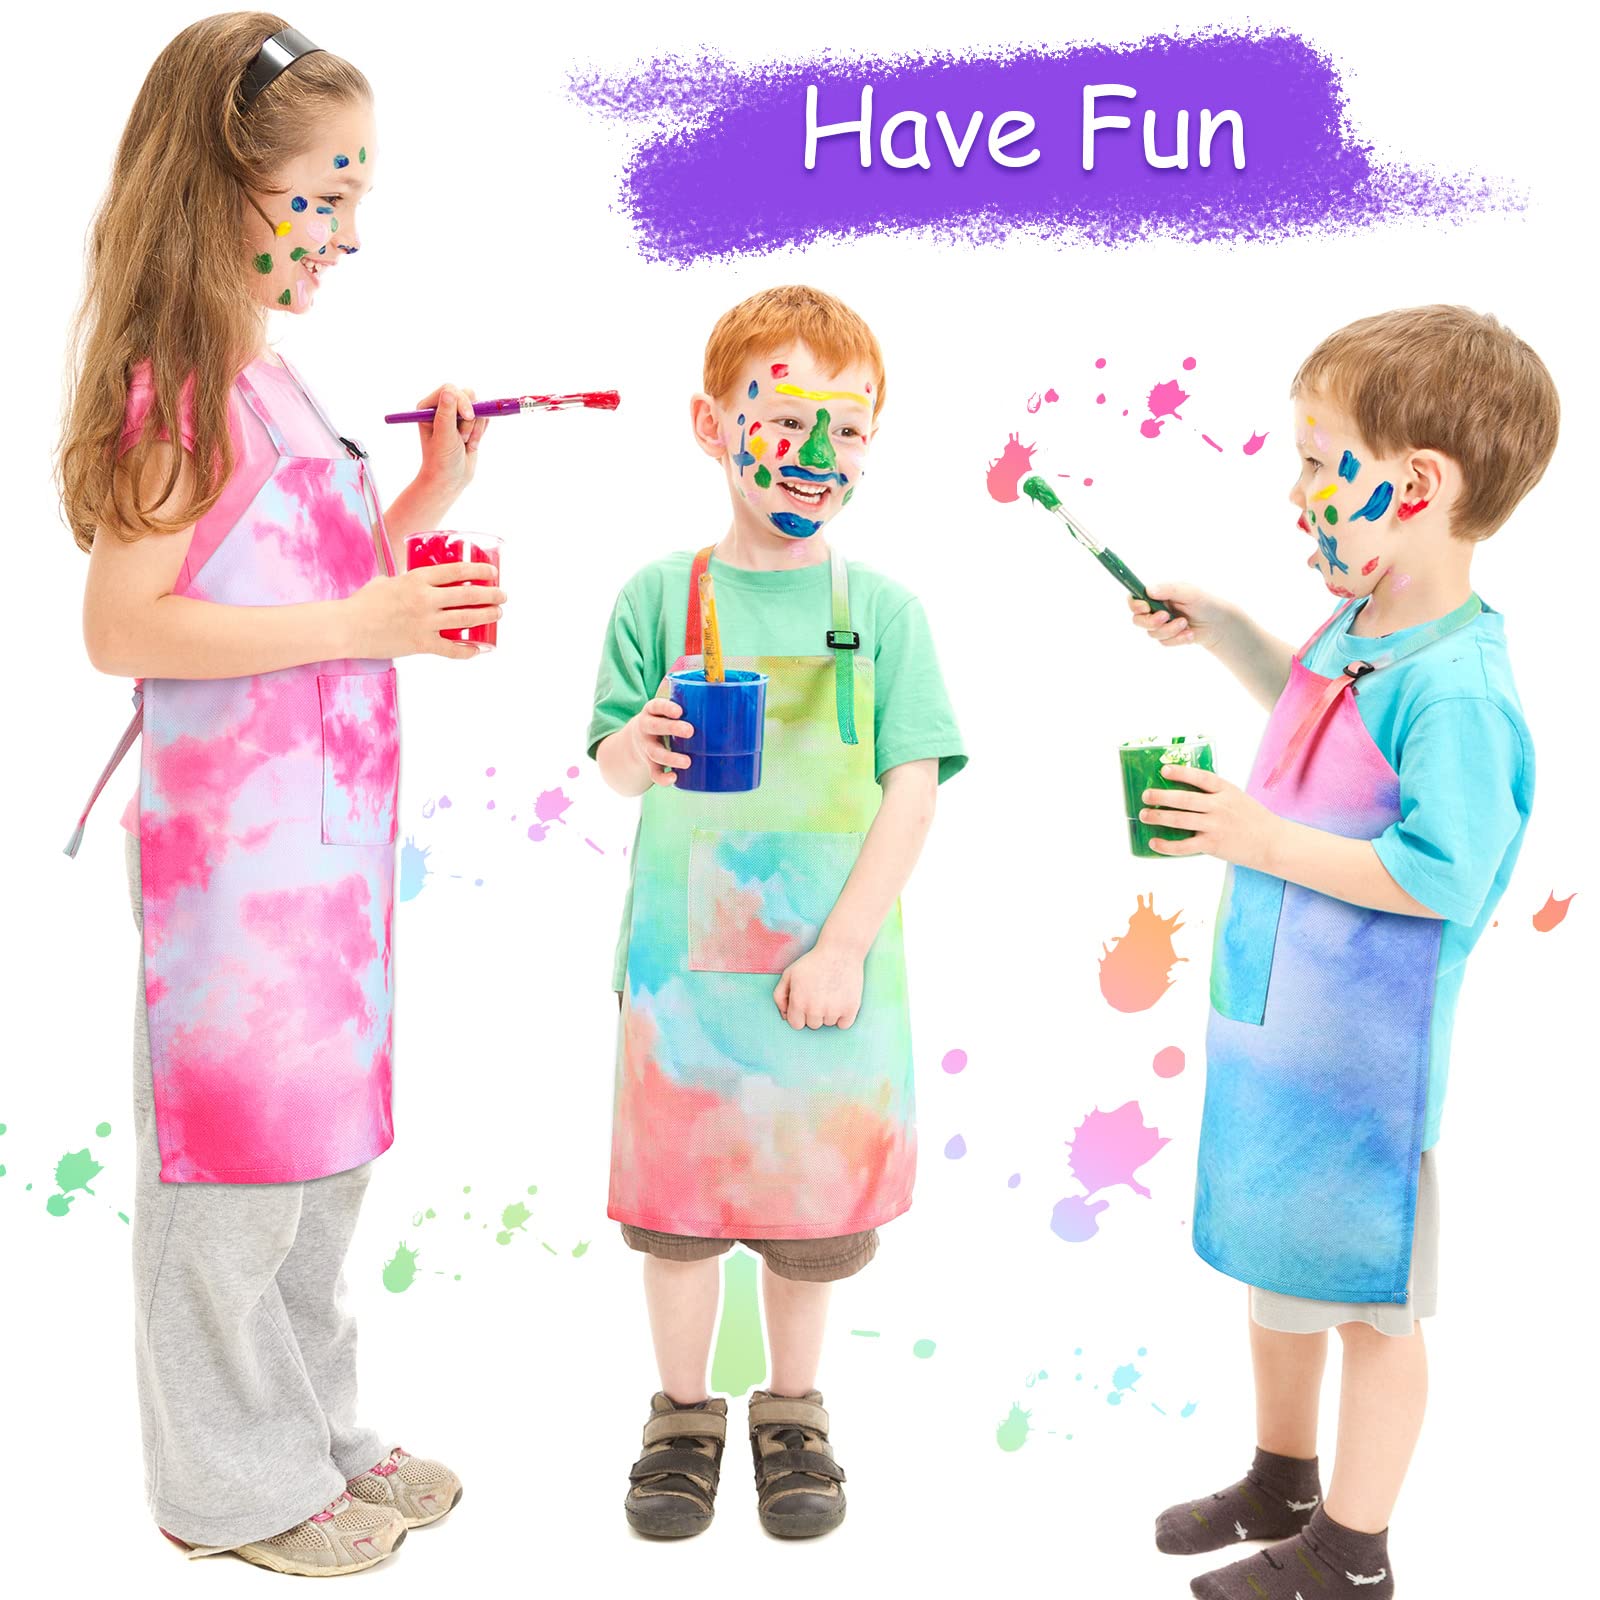 3 Pieces Tie Dye Art Apron For Kids Adjustable Painting Apron Cute Kids Cooking Aprons Artist Tie Dye Apron With Pocket For Child Home Kindergarten Party Supplies Apron For Boys Girls, 3 Styles